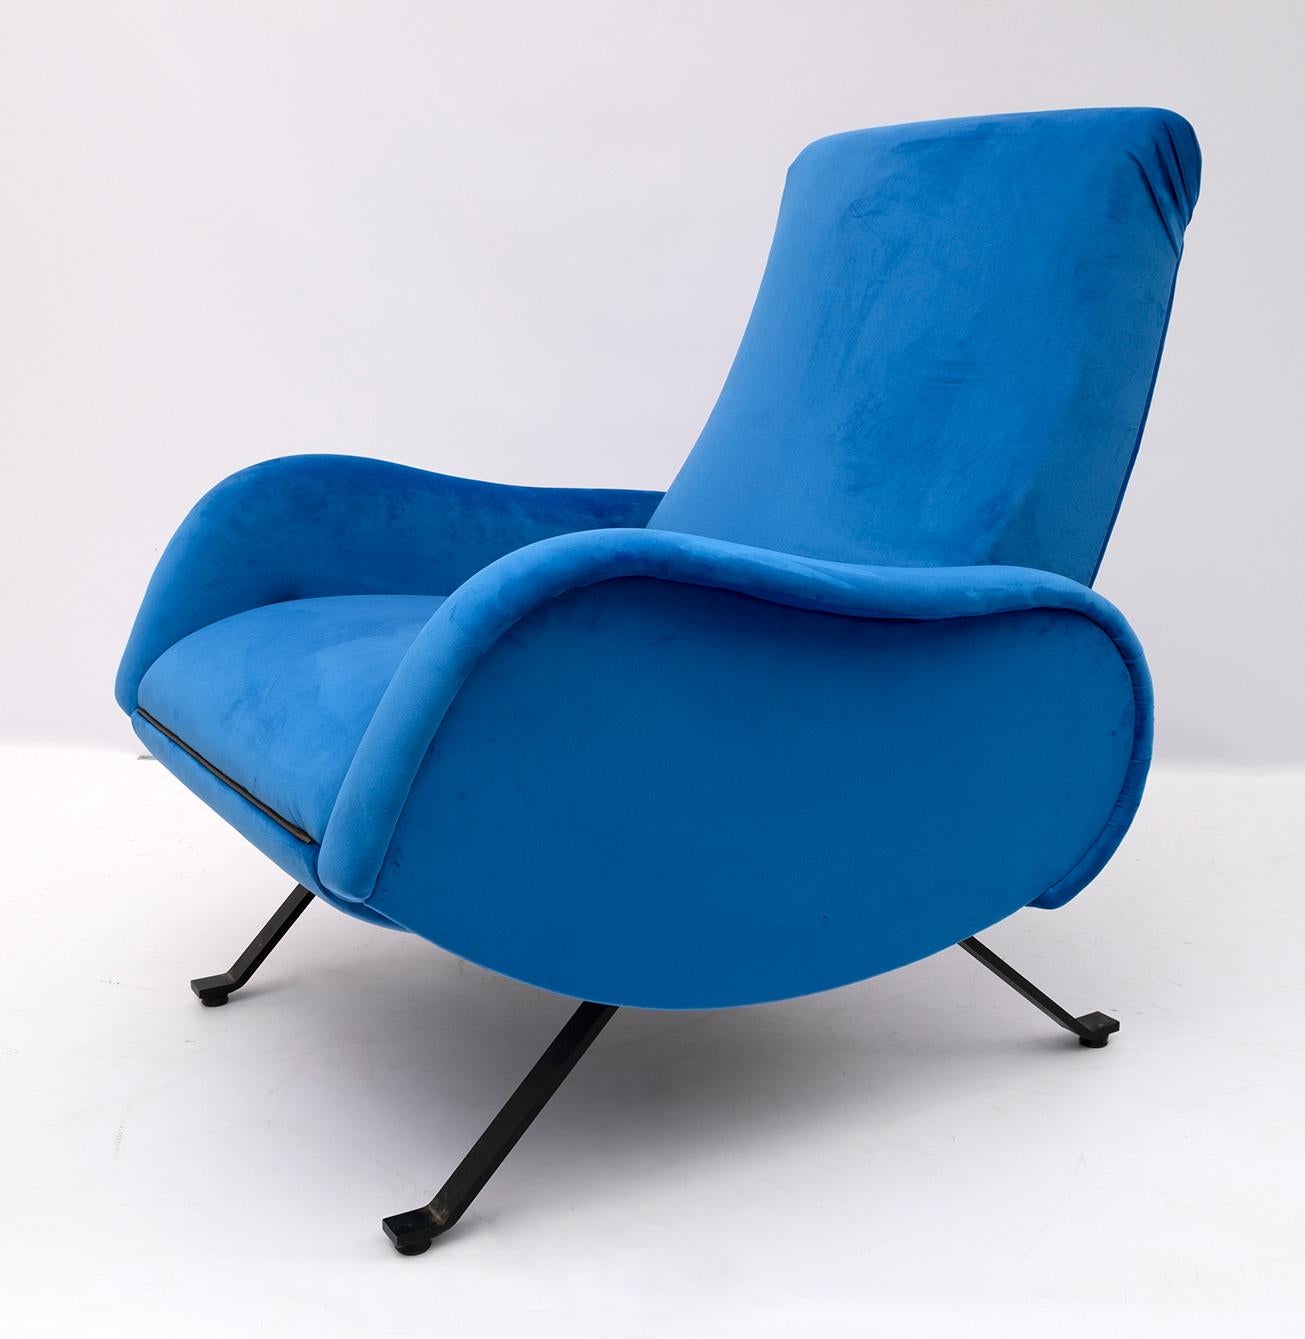 Reclining armchair designed by Marco Zanuso in the 1950s, the armchair has been restored and upholstered in sky blue velvet

The elongated armchair measures 145 cm.